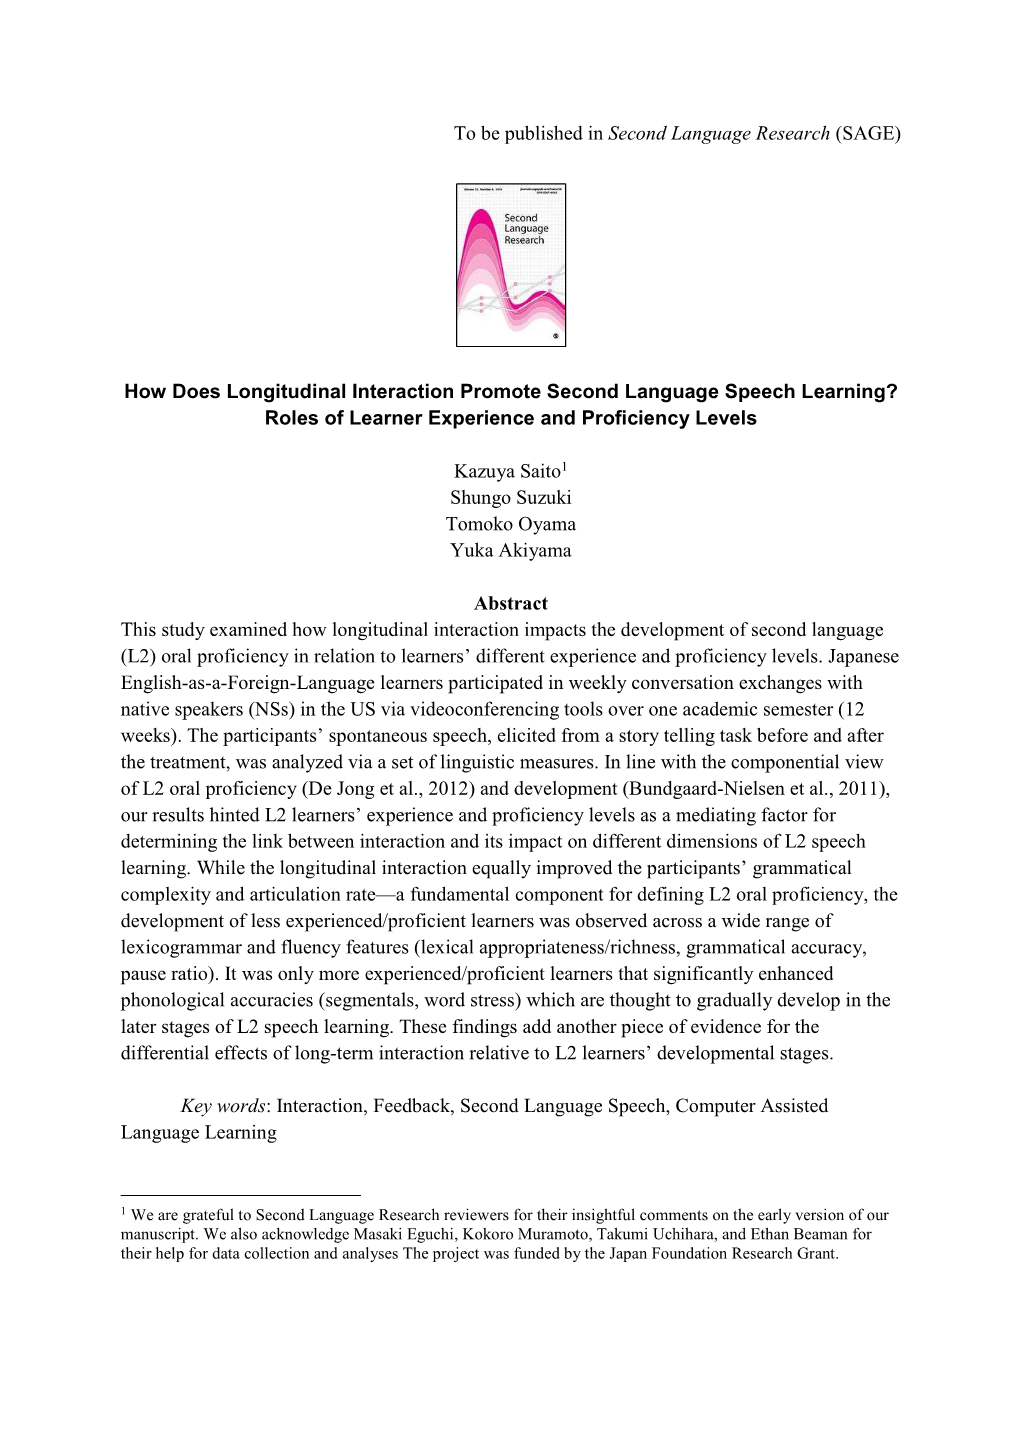 How Does Longitudinal Interaction Promote Second Language Speech Learning? Roles of Learner Experience and Proficiency Levels